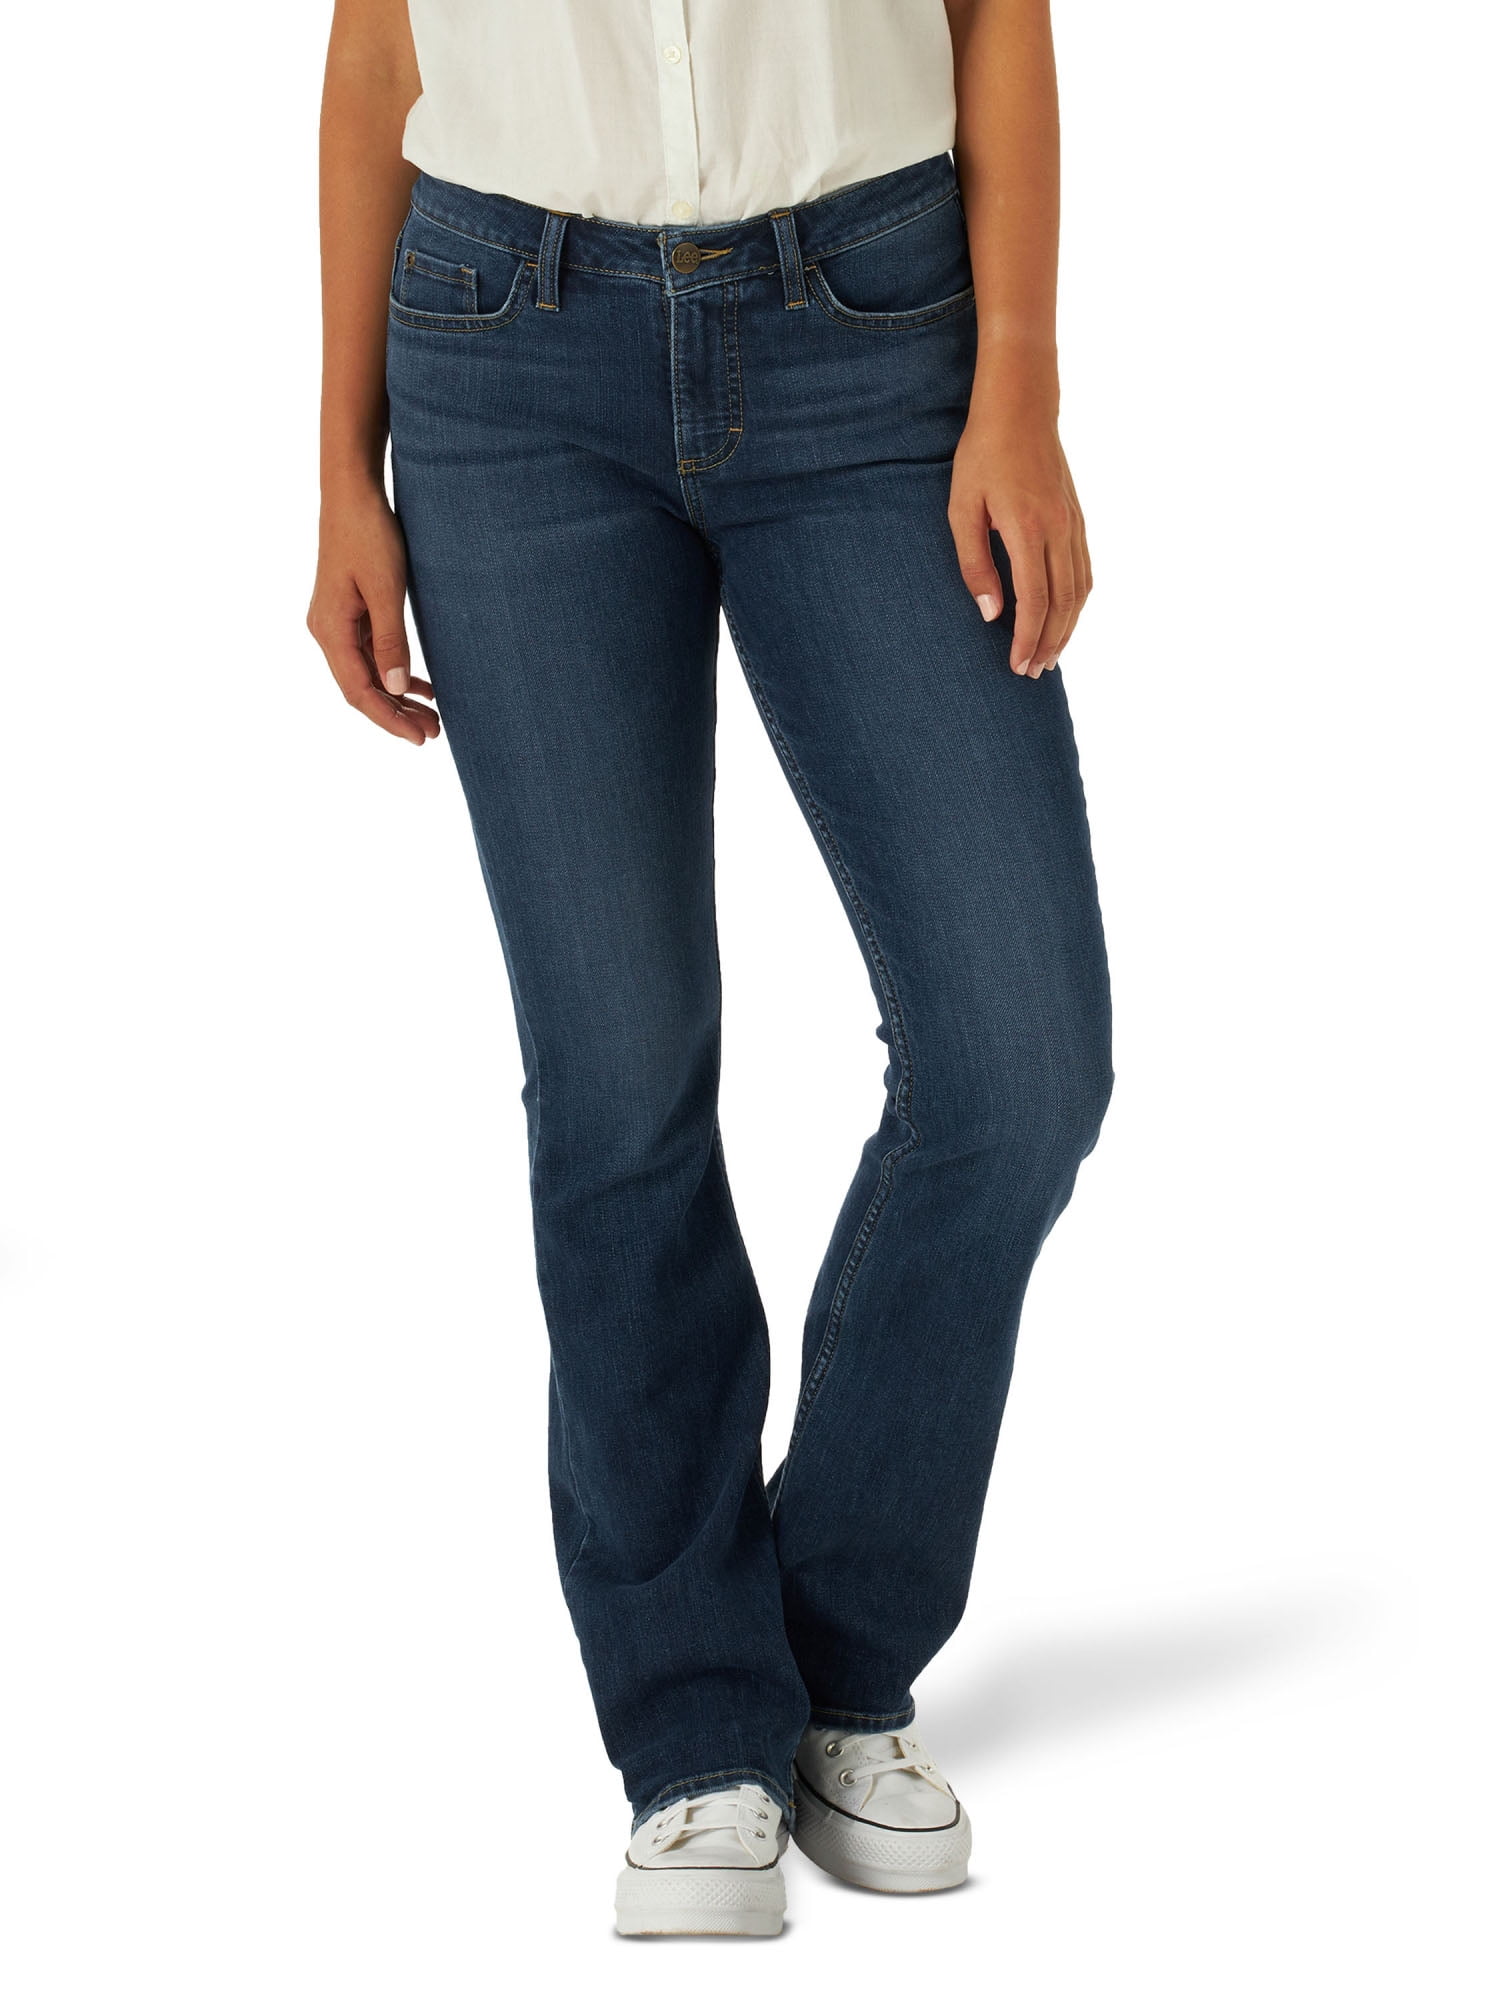 Agolde Denim Relaxed Boot-cut Jeans in Blue Womens Clothing Jeans Bootcut jeans 